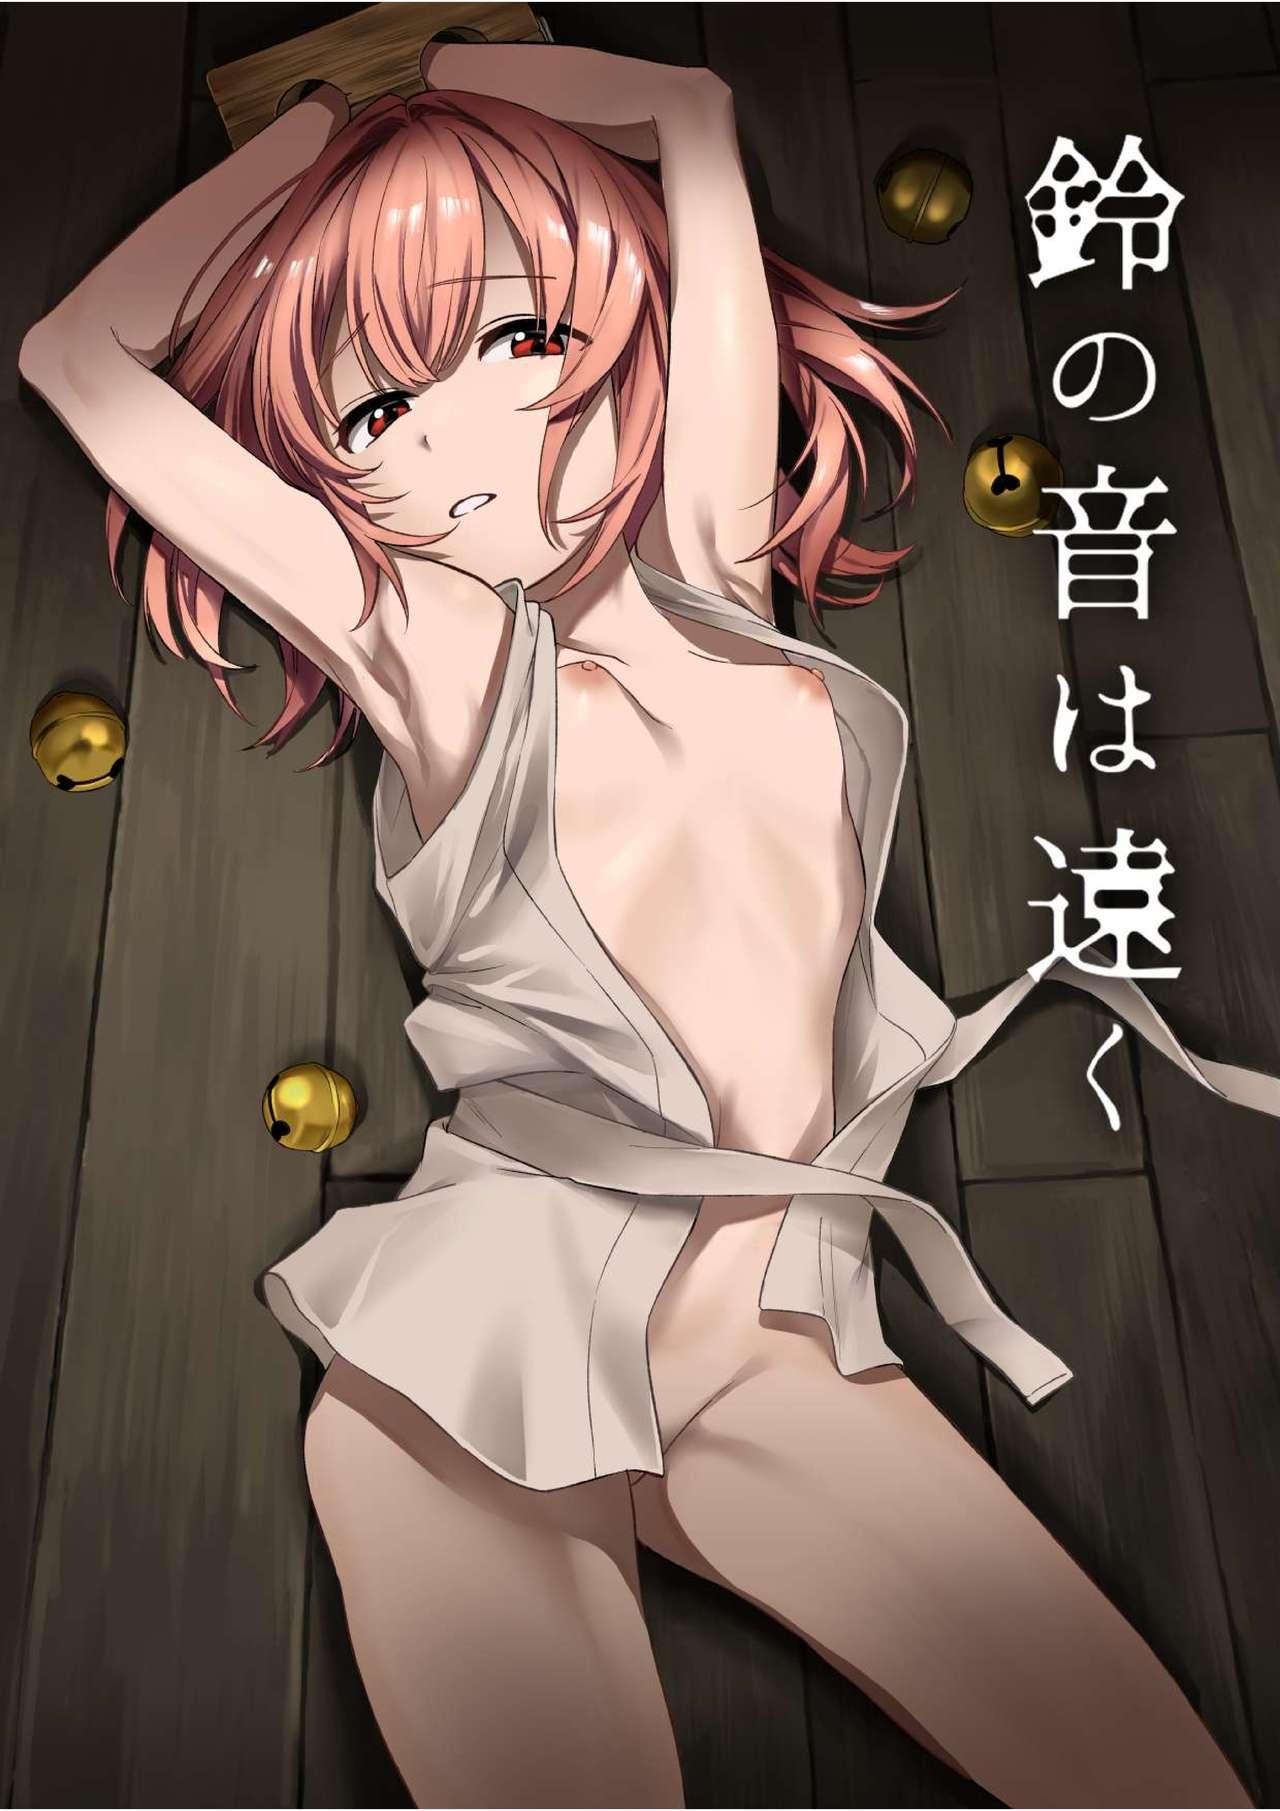 This Suzunooto wa Tooku - Touhou project Amateursex - Picture 1